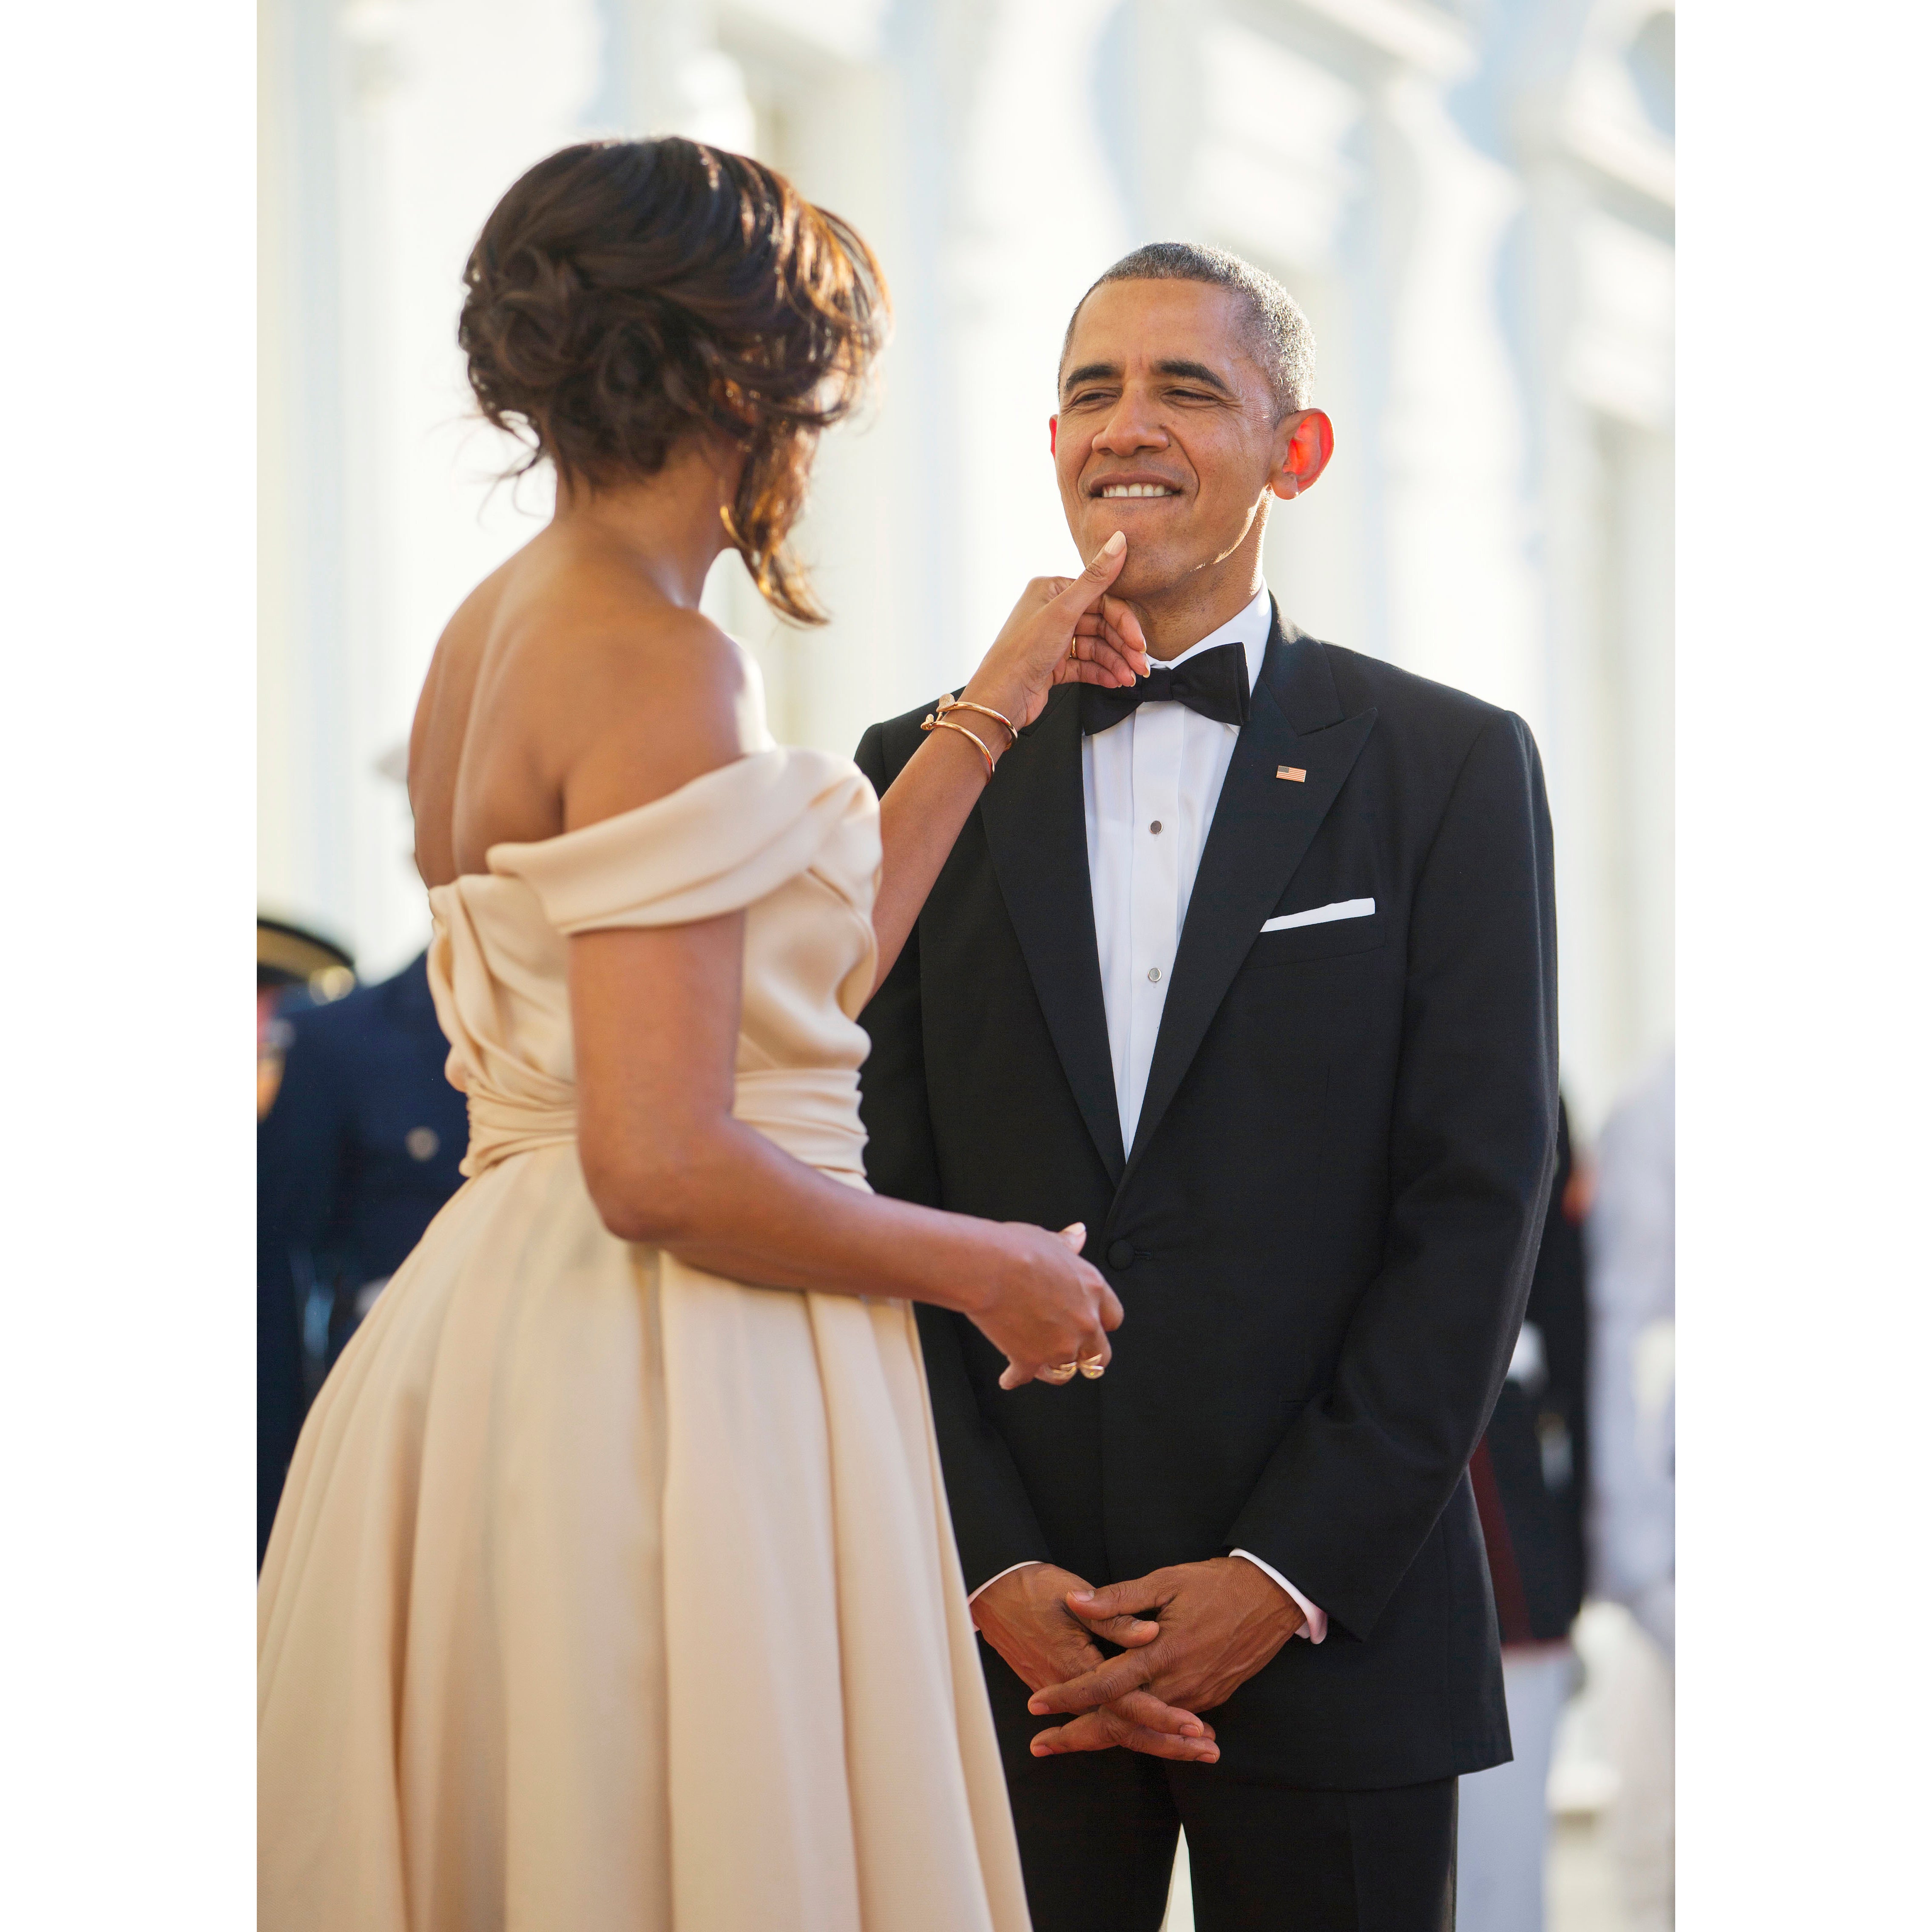 This Photo Captures Barack Obama's Admiration for Michelle Like No Words Ever Could
